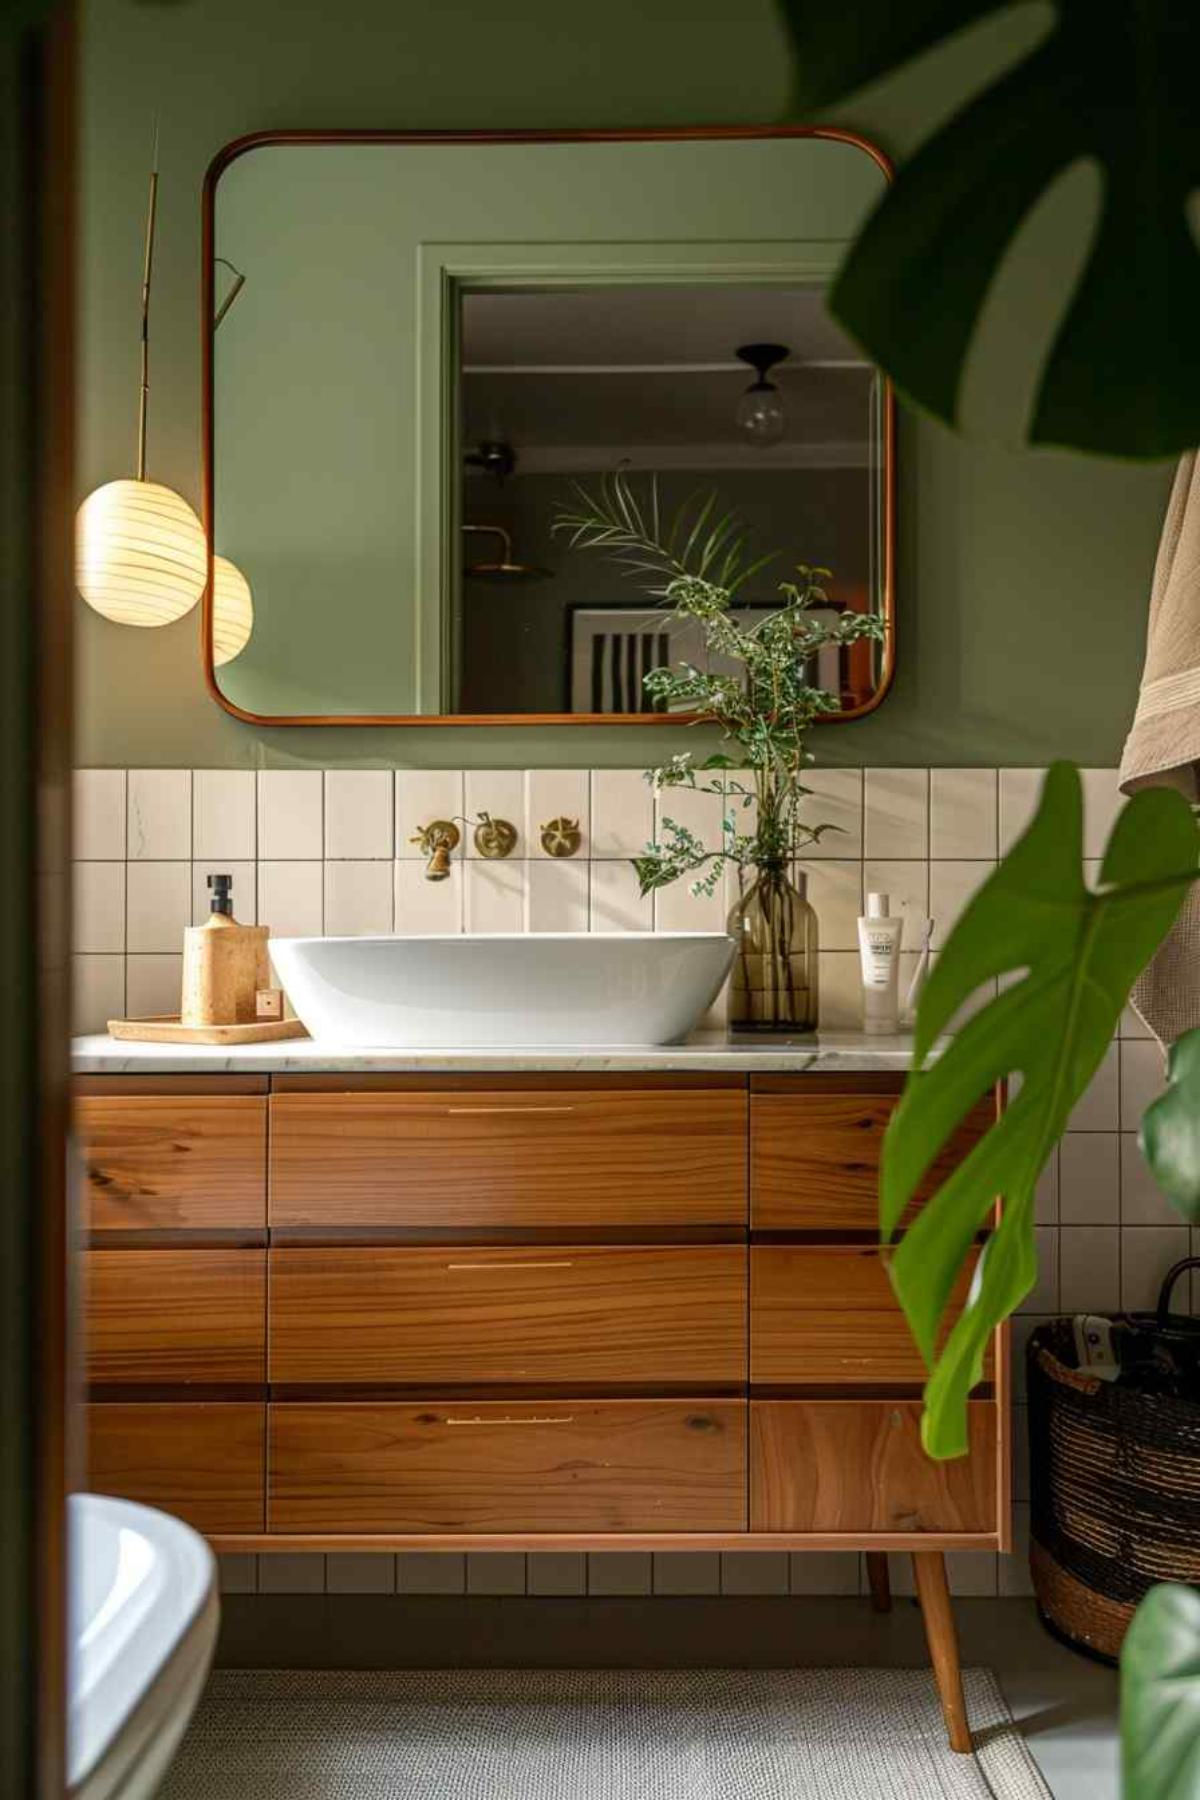 Contemporary Bathroom Vanities: Sleek and Stylish Designs for Today’s Homes